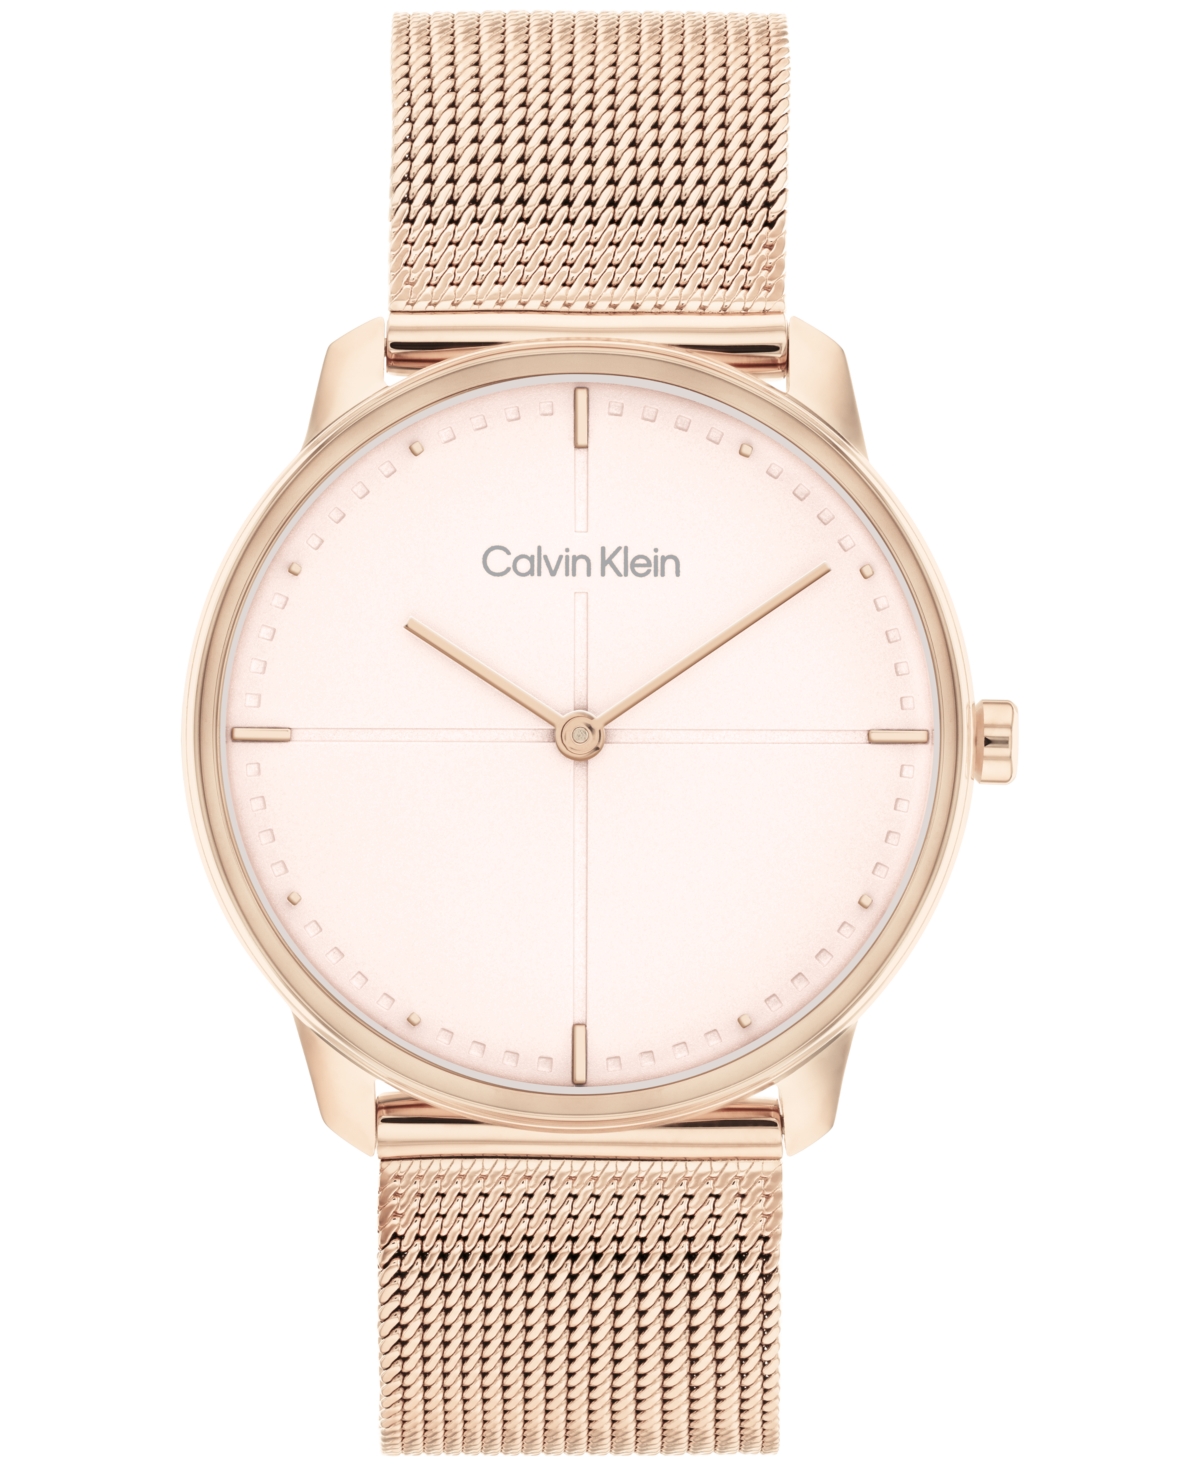 Unisex Carnation Gold-Tone Stainless Steel Mesh Bracelet Watch, 35mm - Carnation Gold-Tone